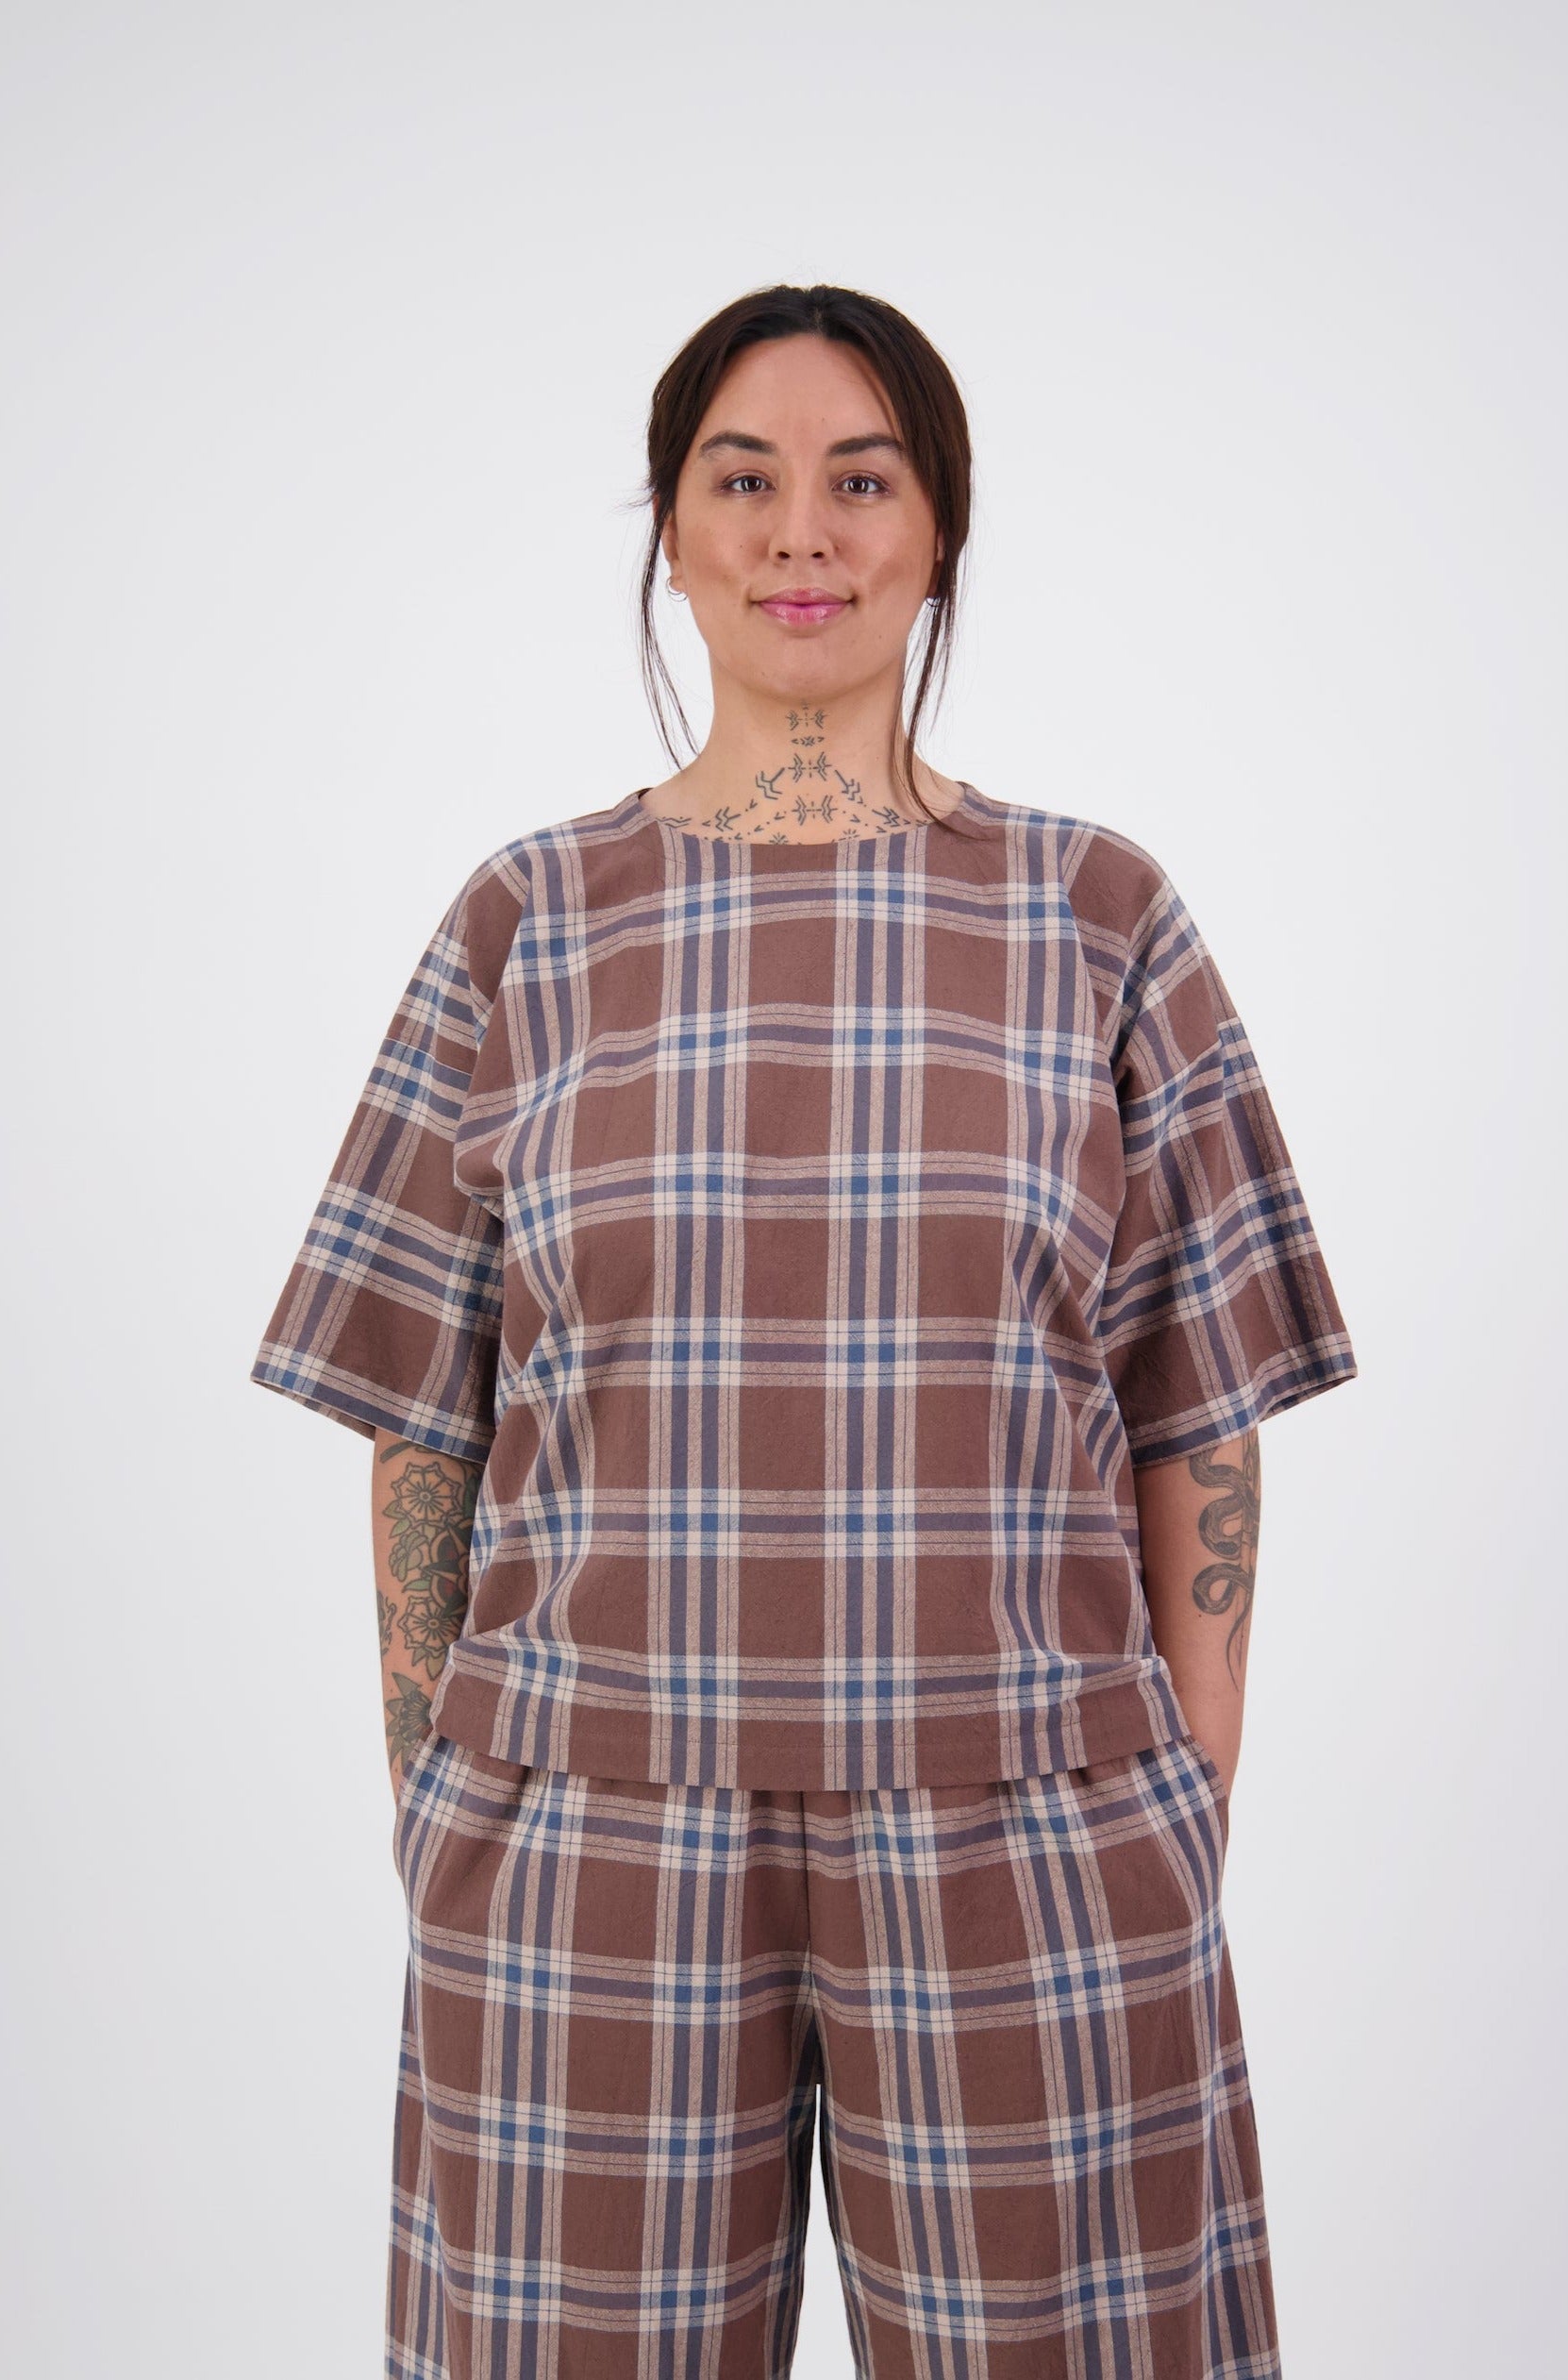 pacific island woman wearing two piece brown plaid cotton set